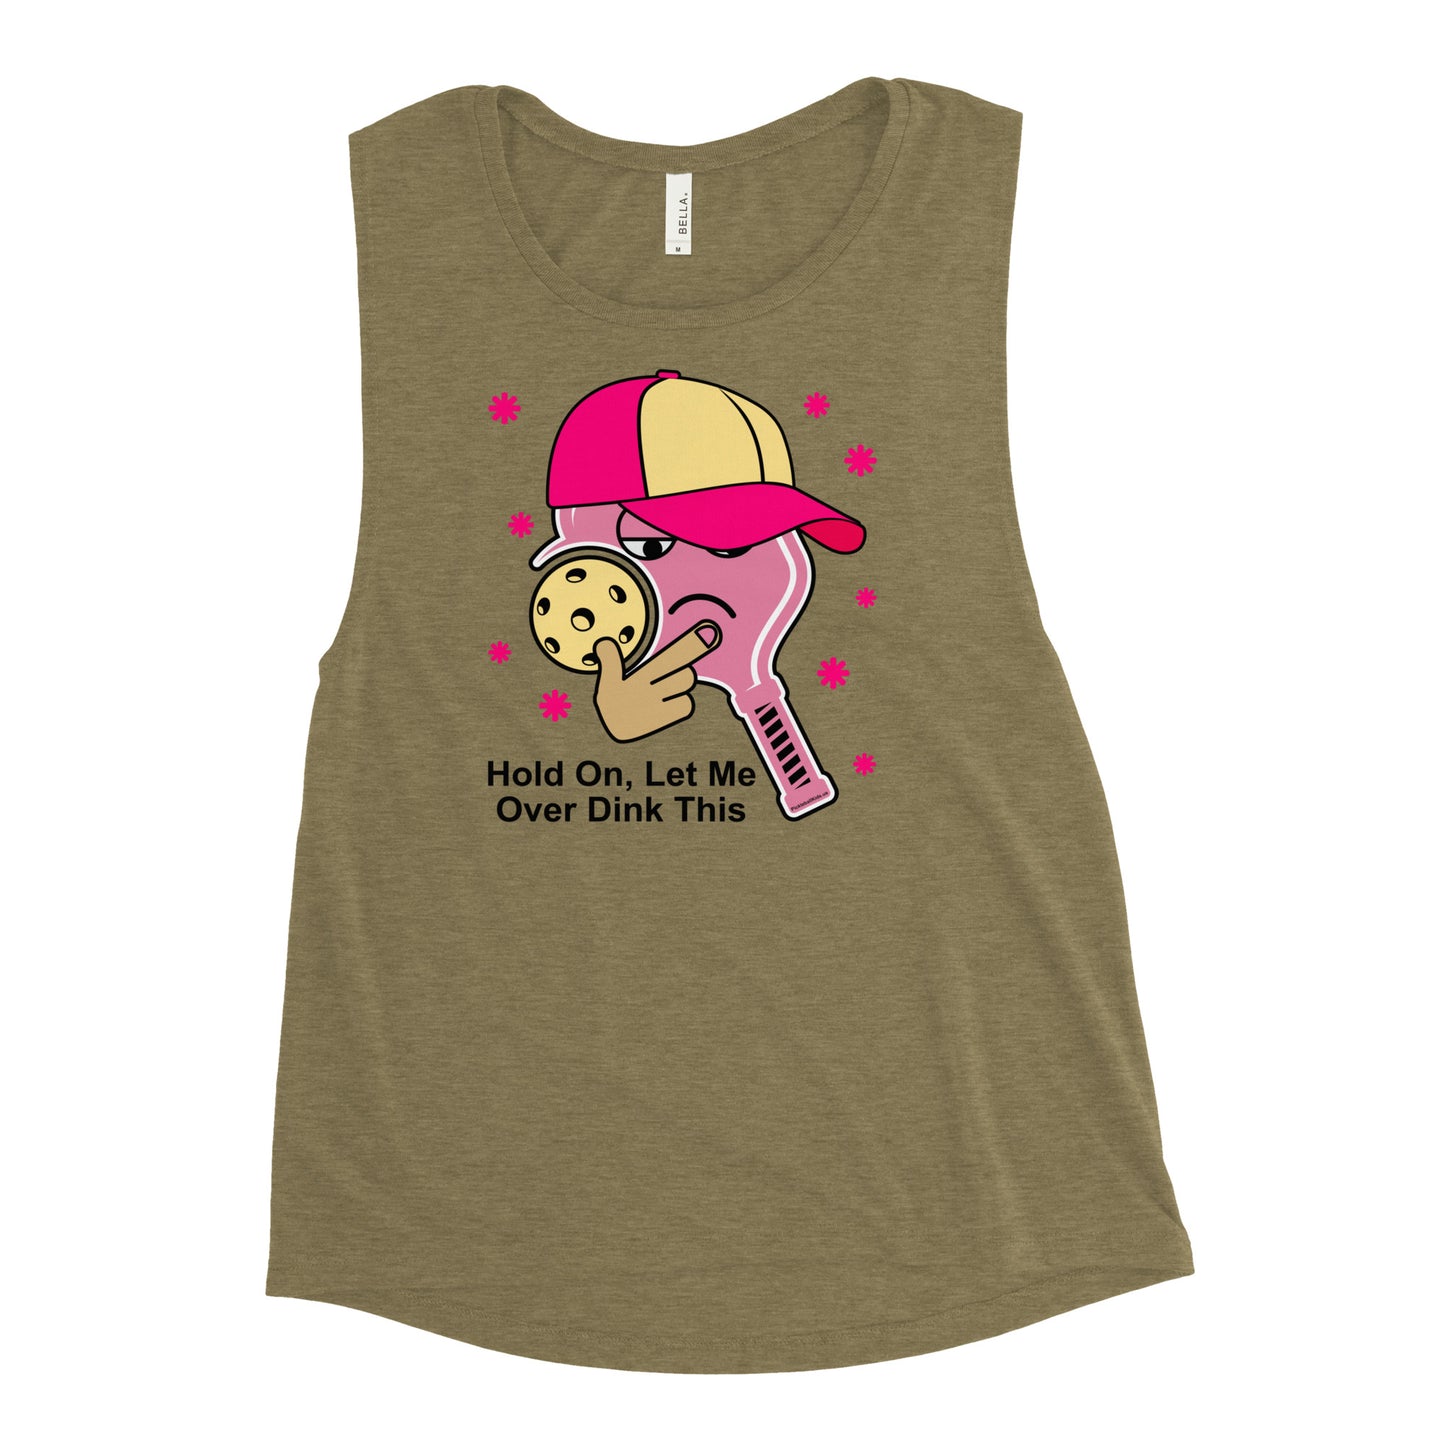 Ladies’  Pickleball Muscle Tank, "Hold On Let Me Over Dink This."